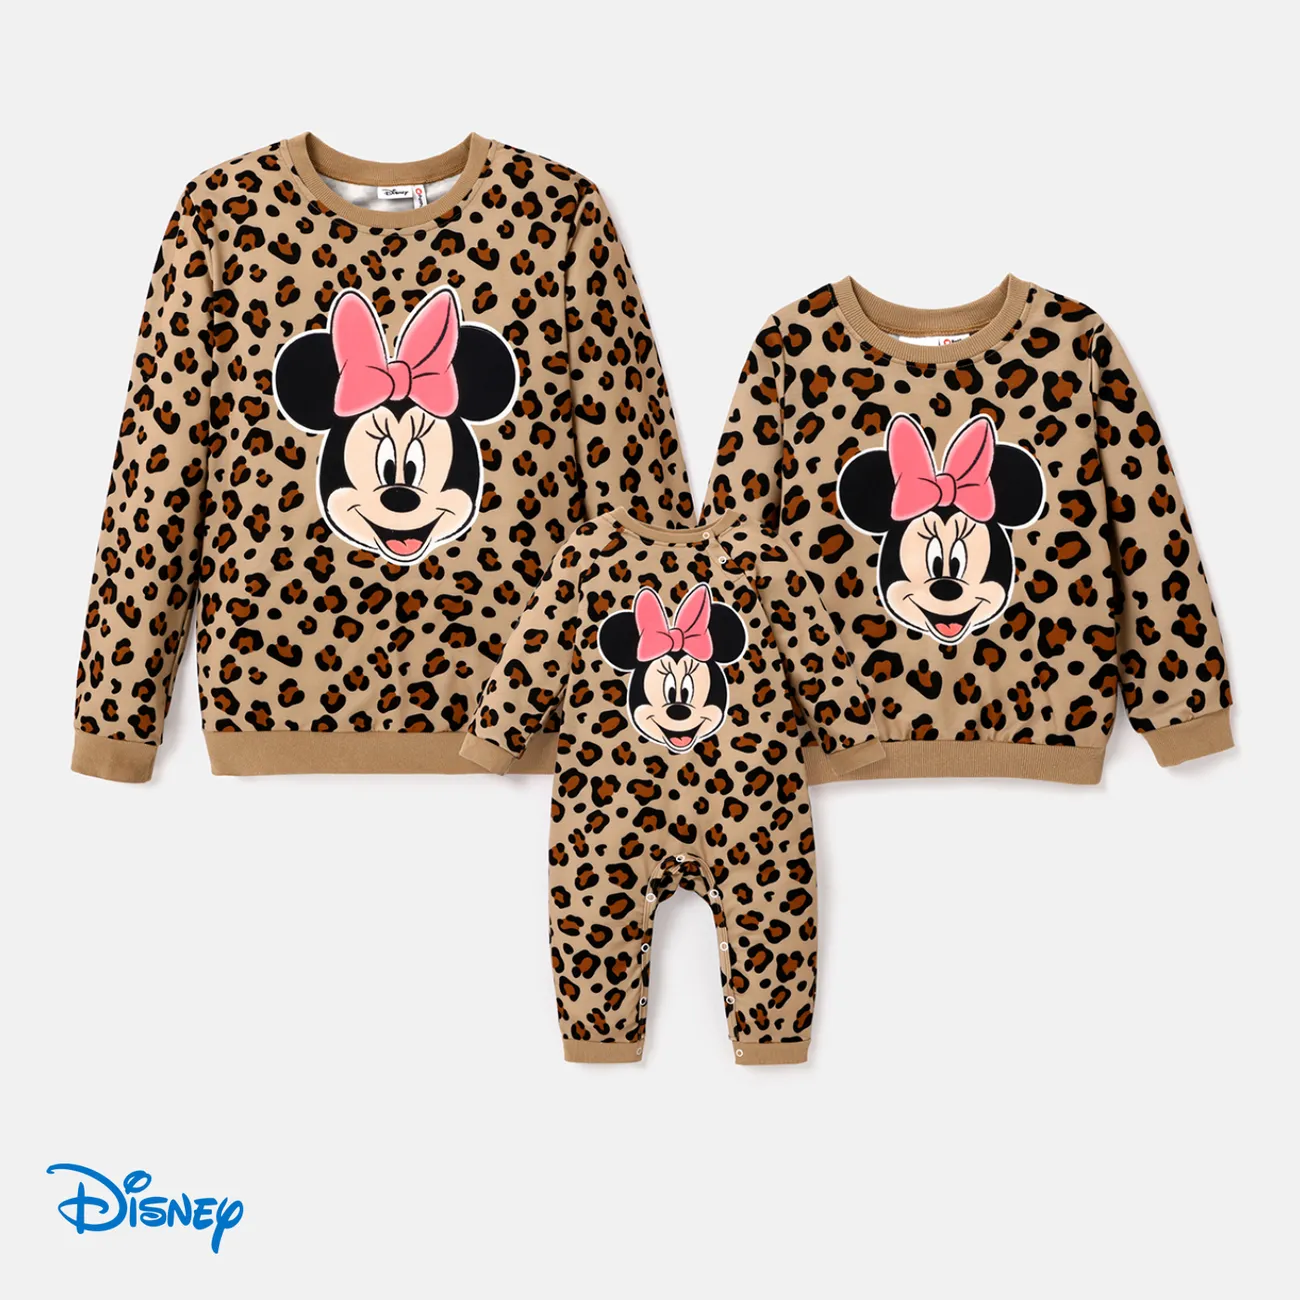 Disney Mickey and Friends Family Matching Letter & Leopard Print Long-sleeve Tops  big image 1